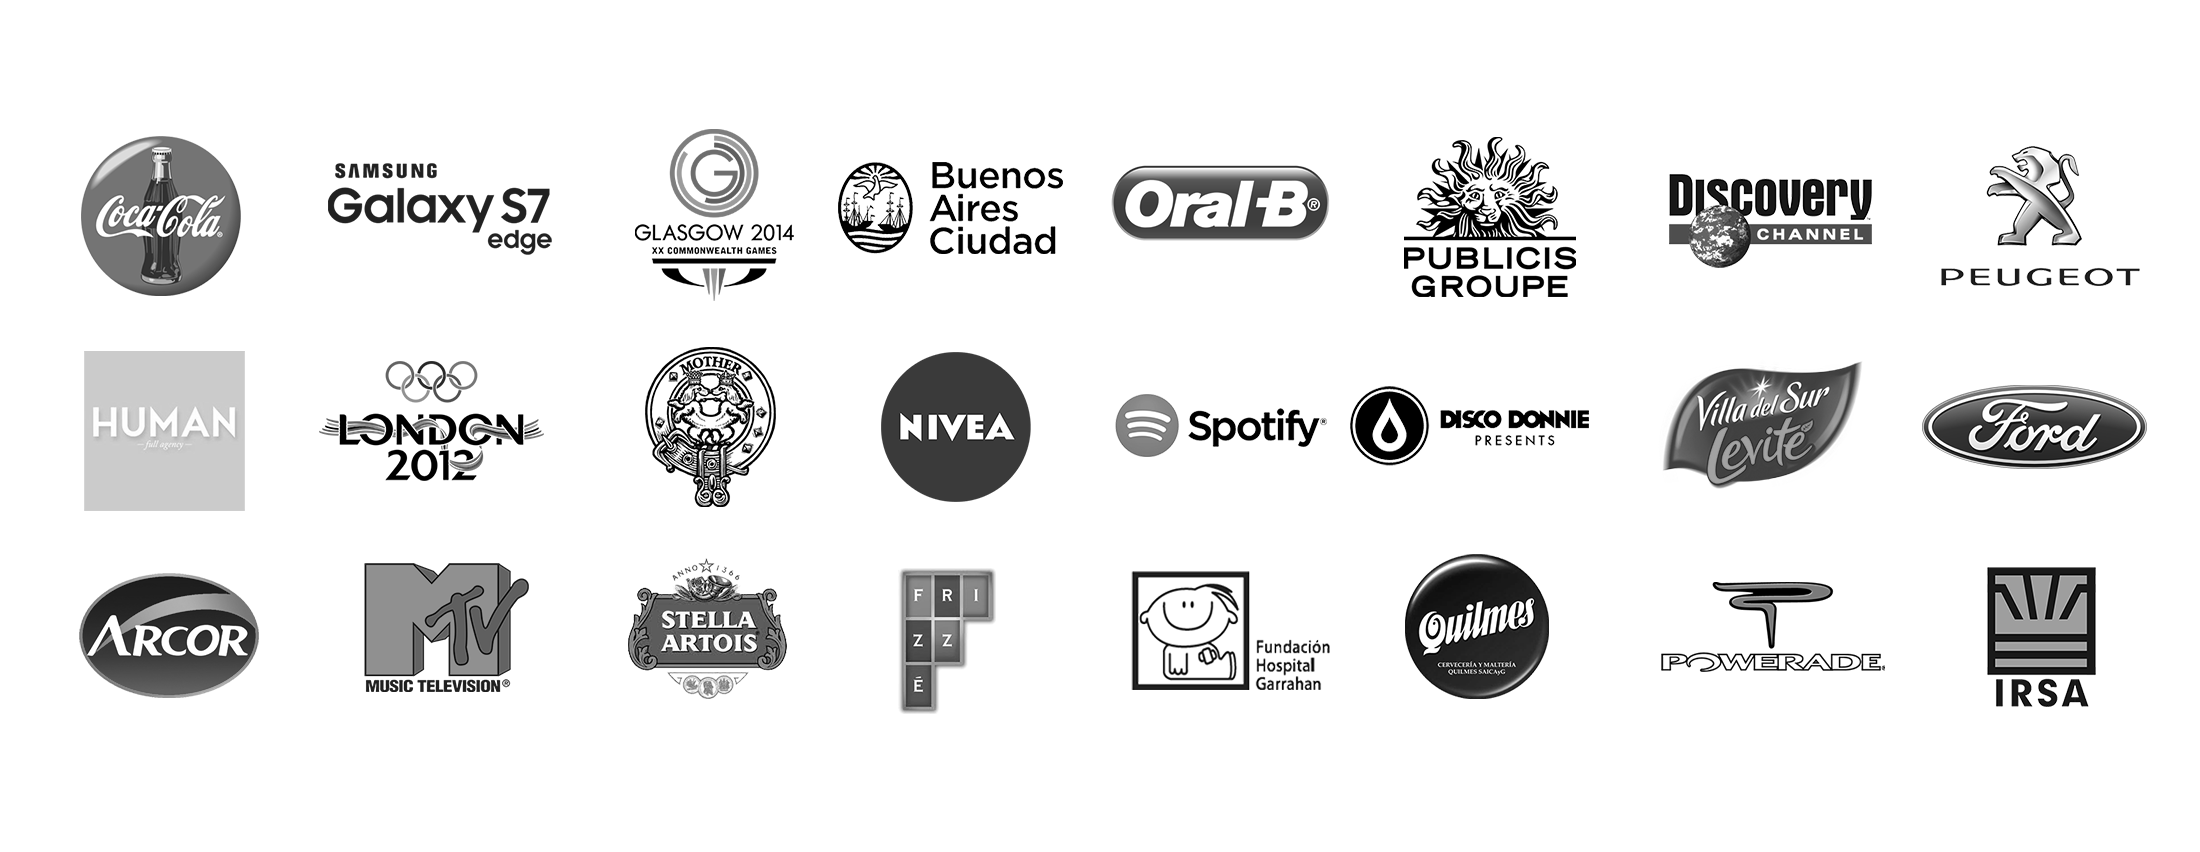 Logos_joined_cuerda_creatives_wide_all_black_white